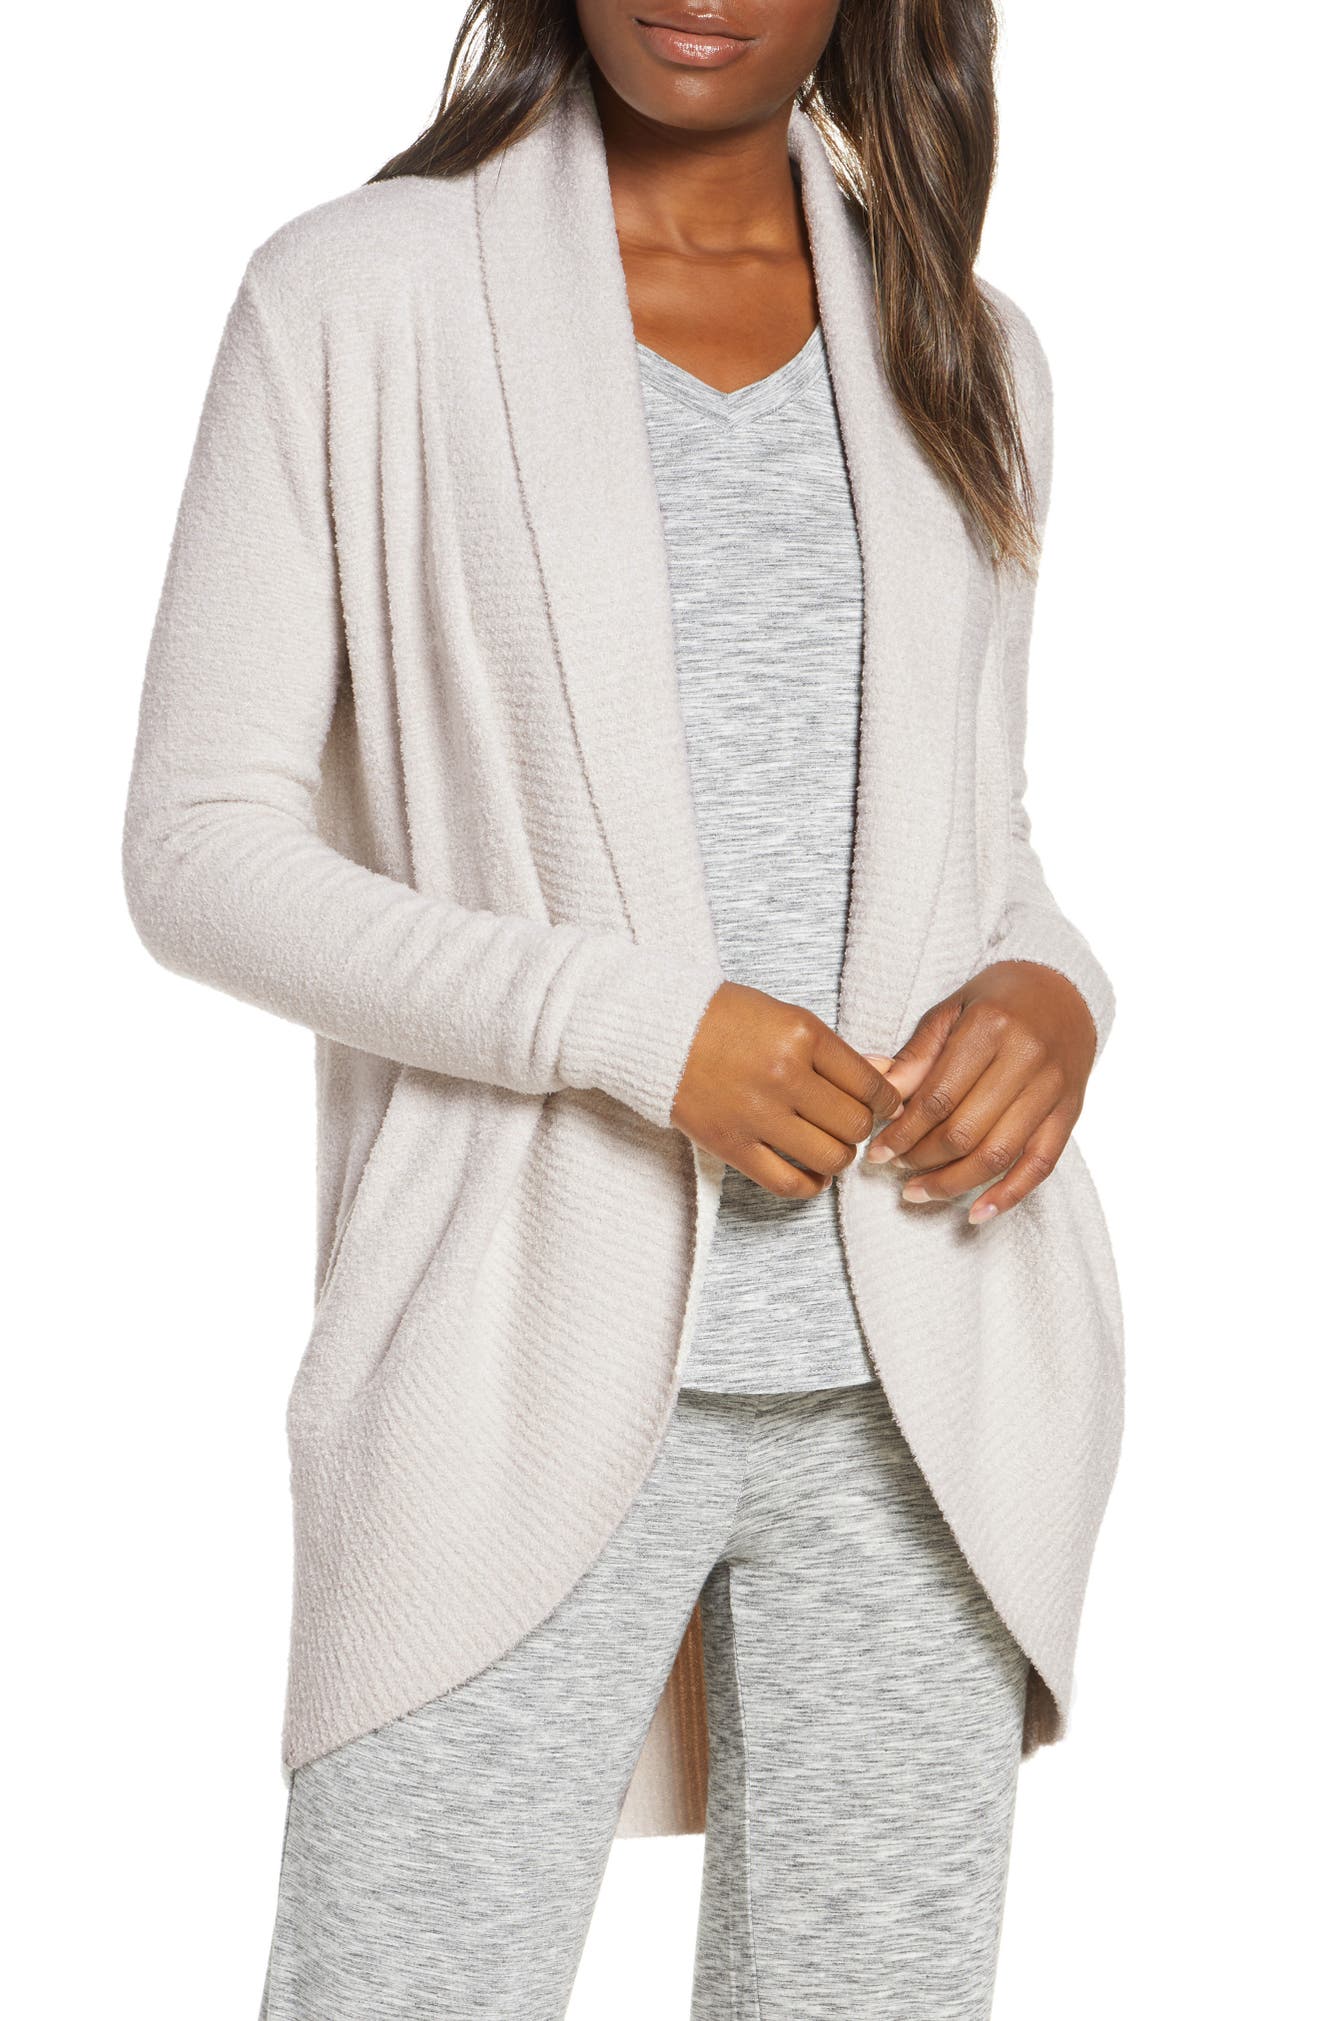 BAREFOOT DREAMS<SUP>®</SUP> CozyChic Lite<sup>®</sup> Circle Cardigan, Main, color, H SILVER PEARL